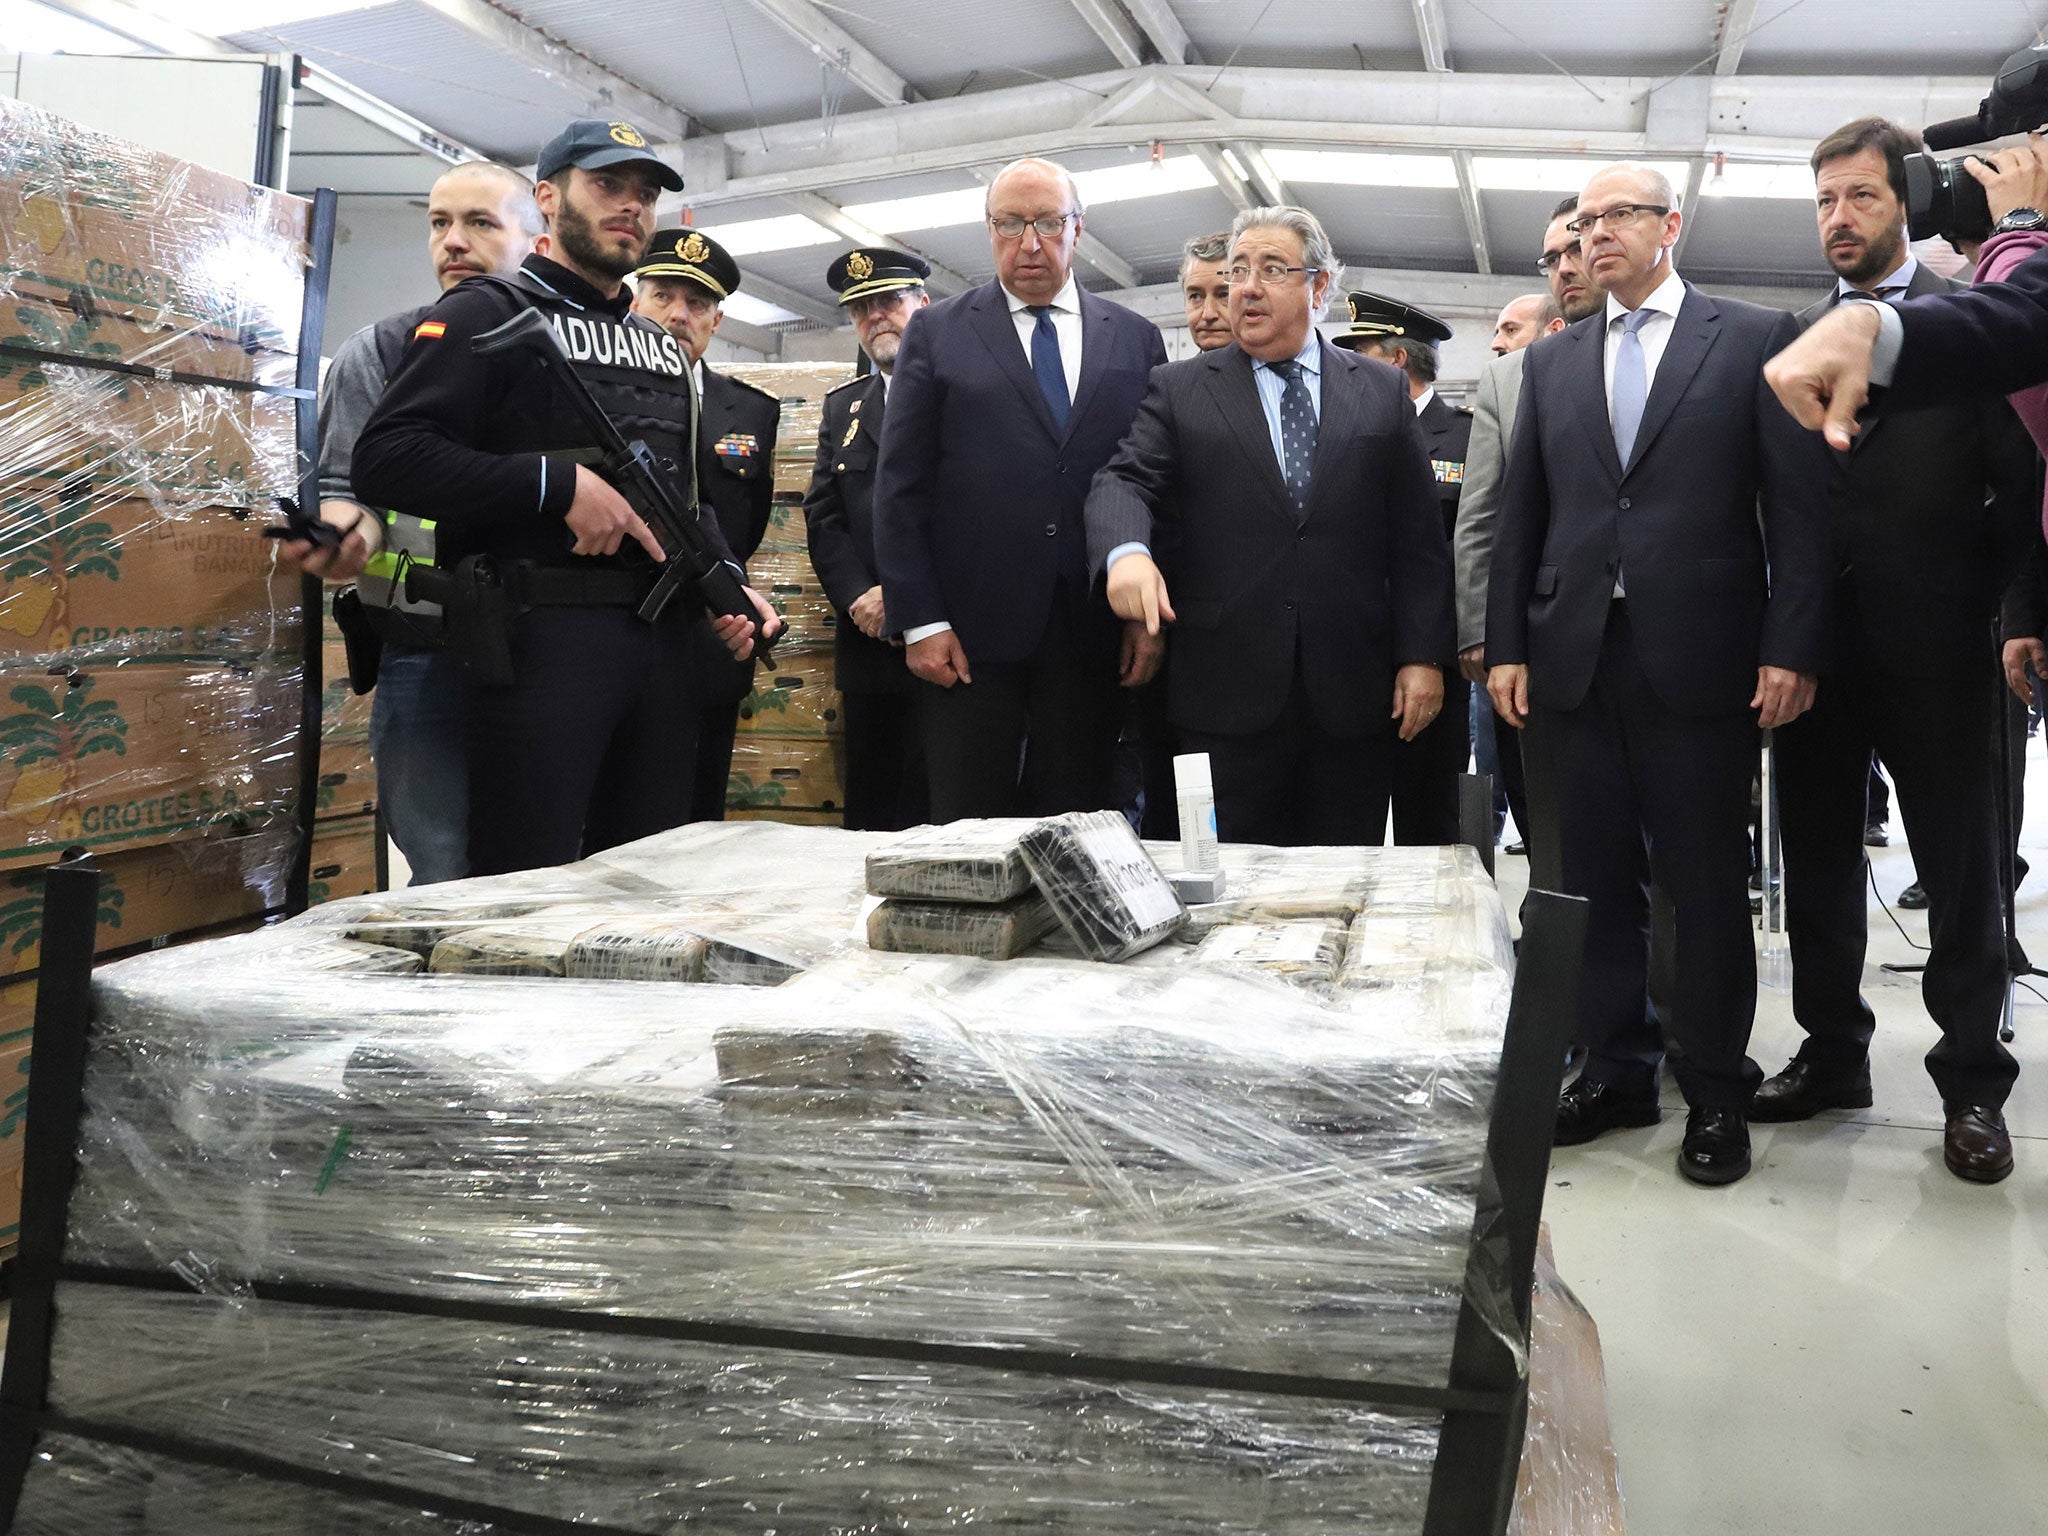 Spain's interior minister, Juan Ignacio Zoido, stands next to the almost nine tons cocaine shipment seized inside a bananas container at Algeciras port in Cadiz, southern Spain